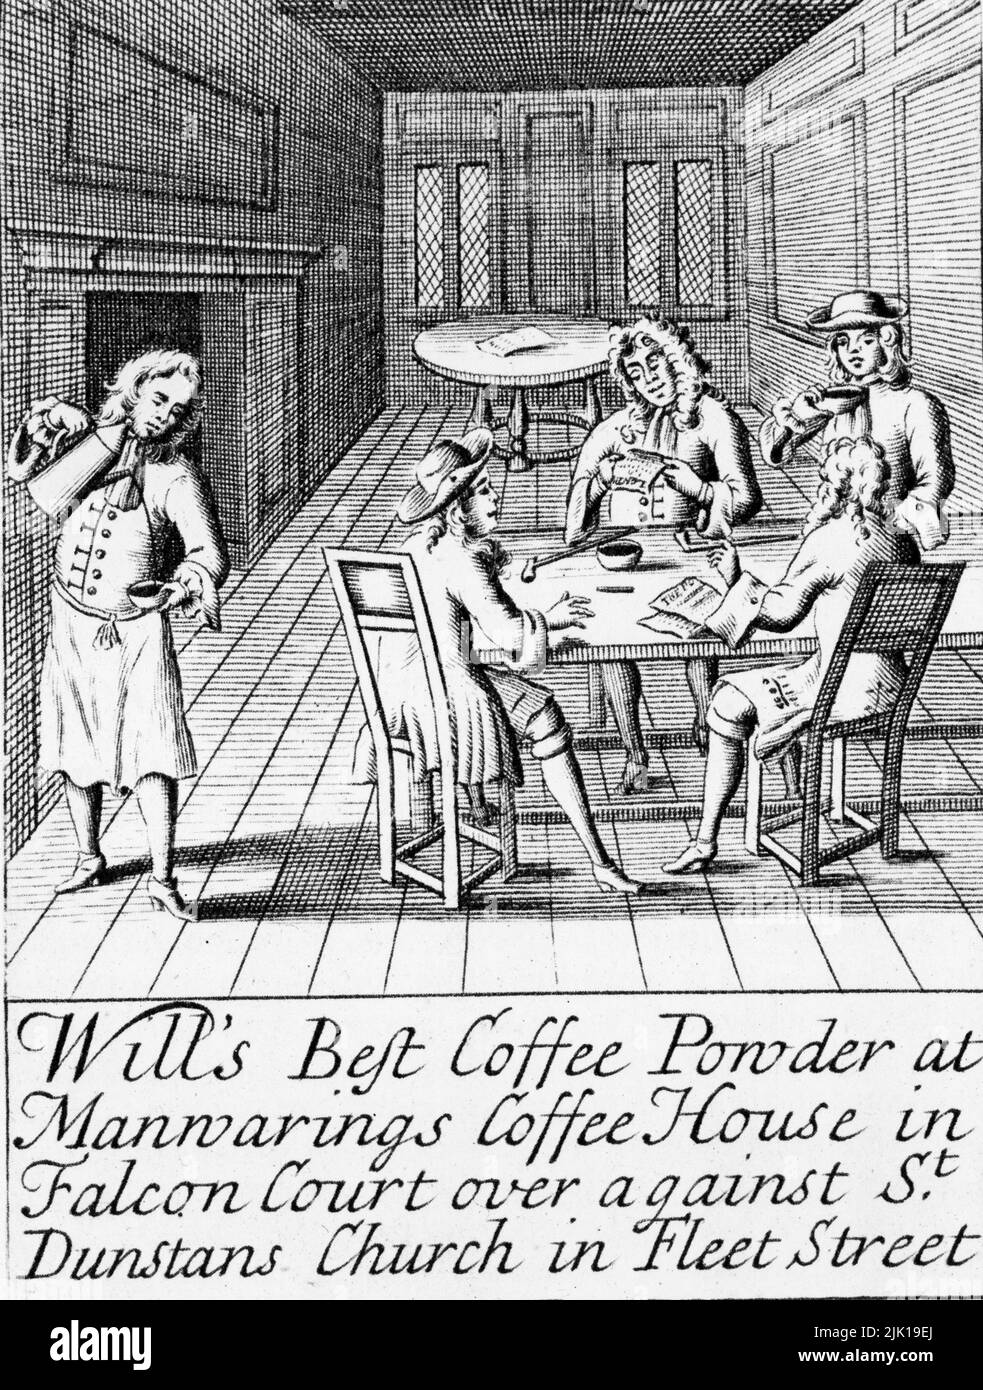 Trade card for Will’s Best Coffee Powder at Manwarings Coffee House, c1700. An illustration of Manwarings Coffee House, Falcon Court, Nr St Dunstan-in-the-West, Fleet Street, London. English coffeehouses in the 17th and 18th centuries were public social places where men would meet for conversation and commerce. Stock Photo